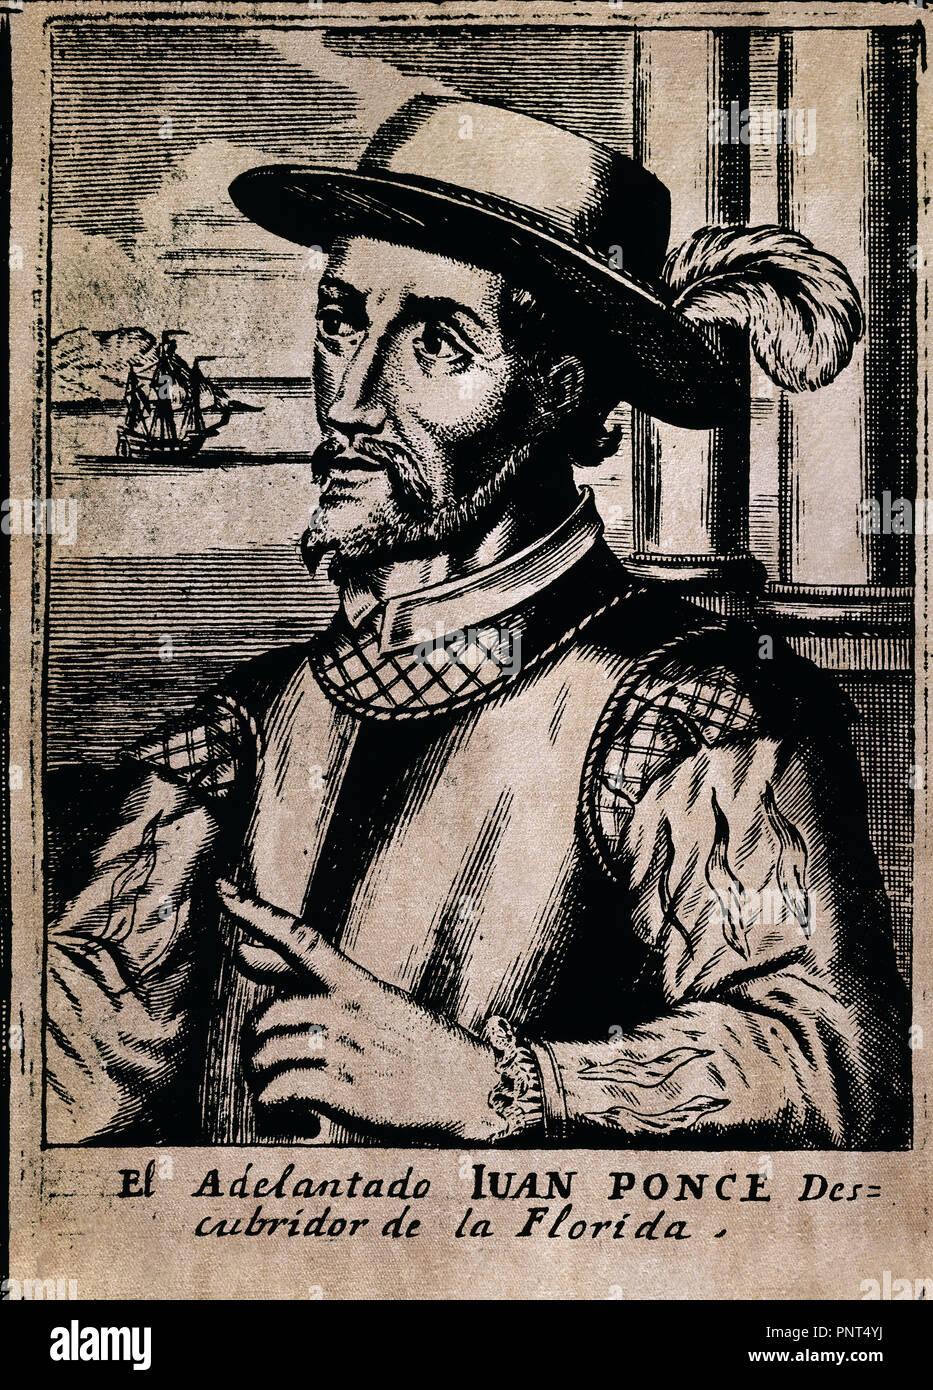 Portrait of Juan Ponce de León (1460-1521), was a Spanish conquistador and supposed to have discovered Florida.. Madrid, Institute for Latin American Cooperation. Location: INSTITUTO DE COOPERACION IBEROAMERICANA. MADRID. SPAIN. Stock Photo